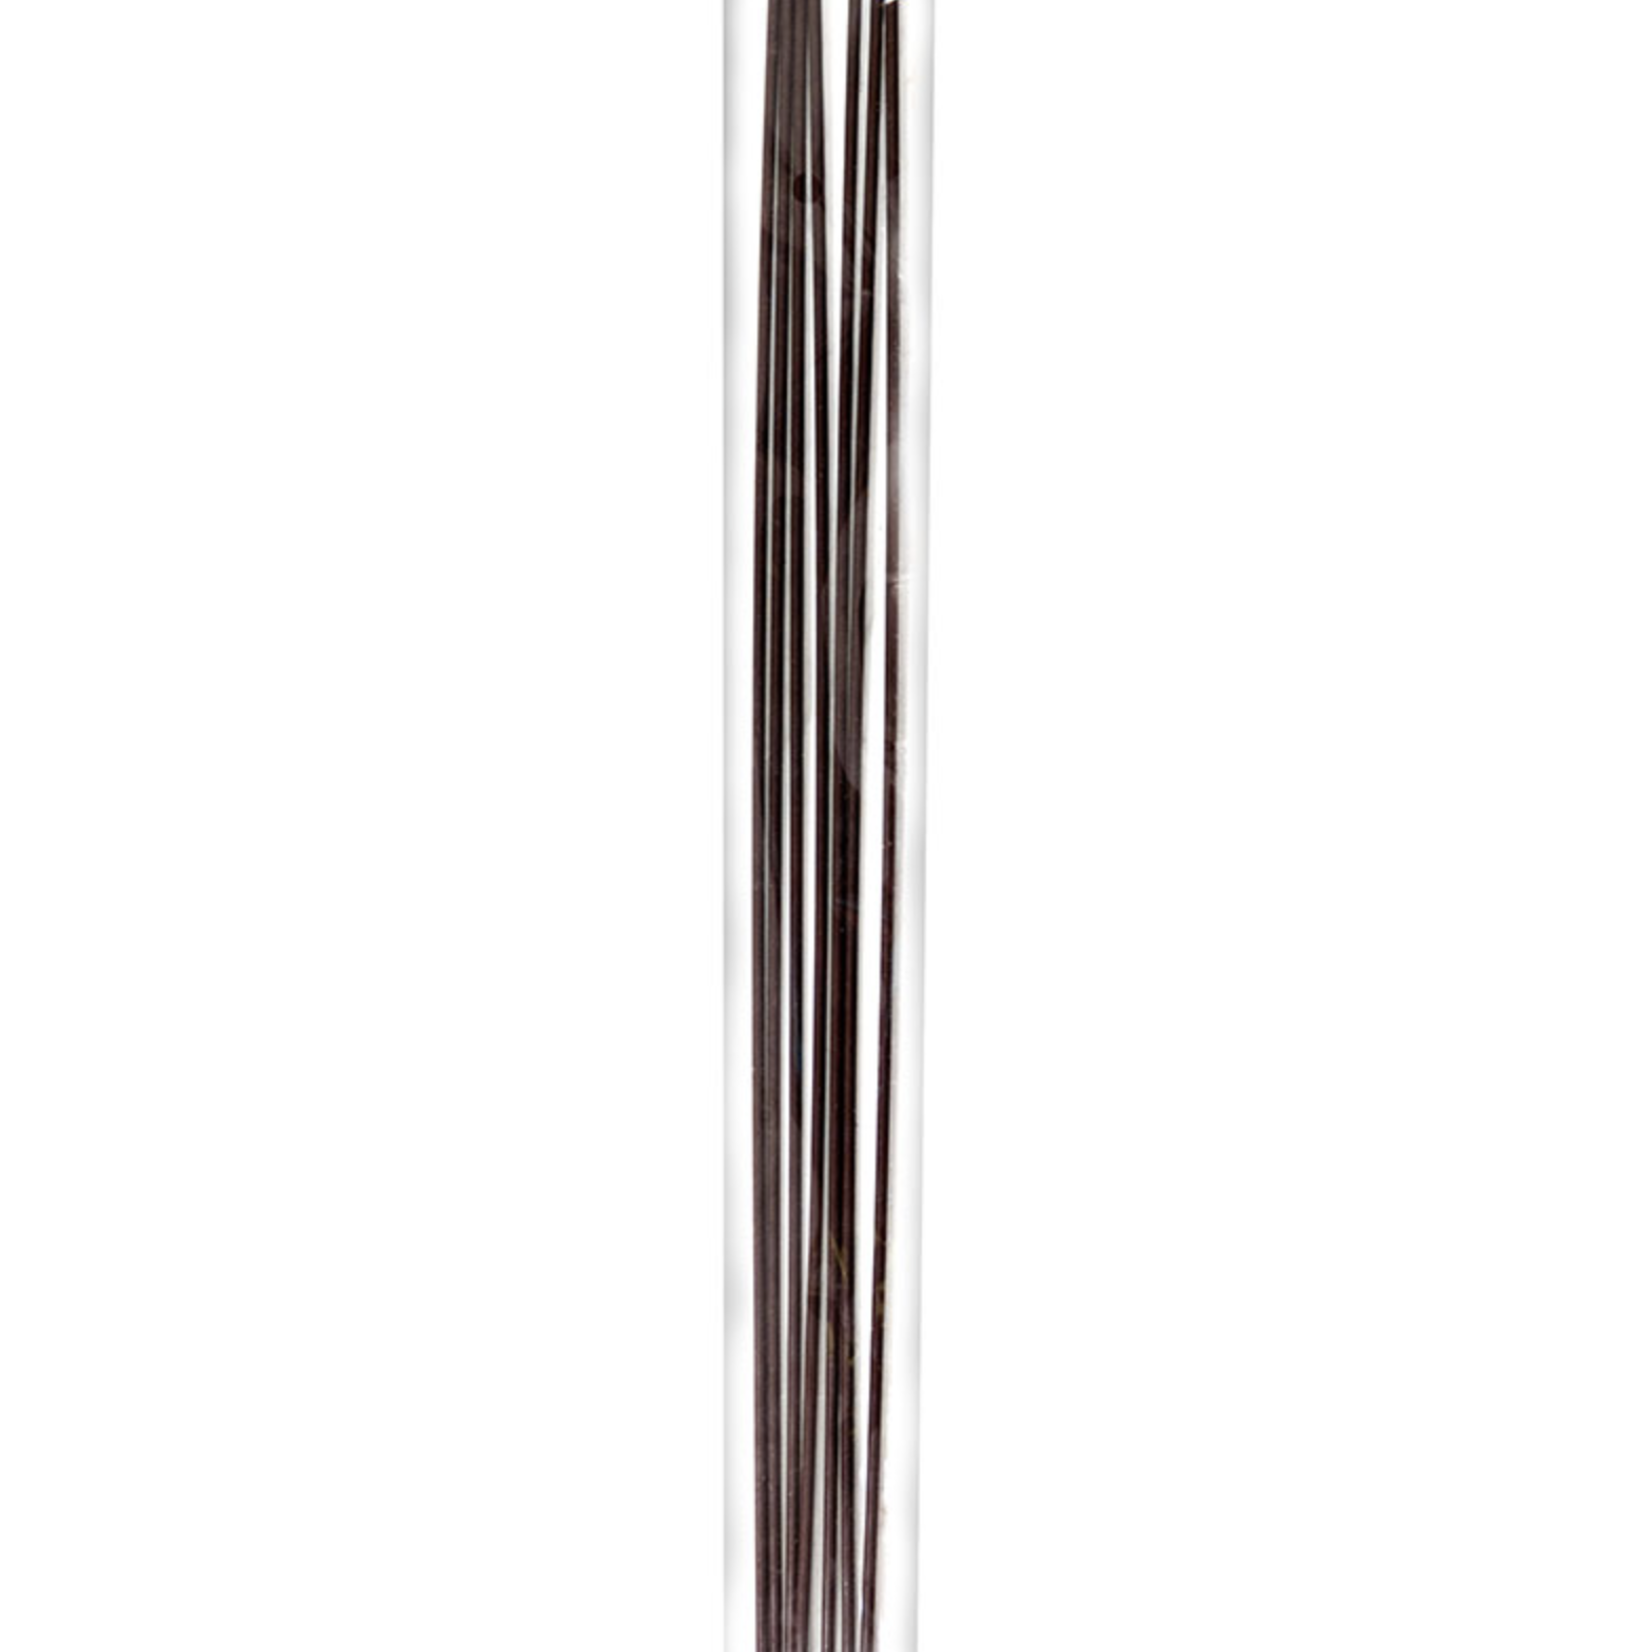 18” BROWN ORCHID STAKES, 8 PCS PER PACK